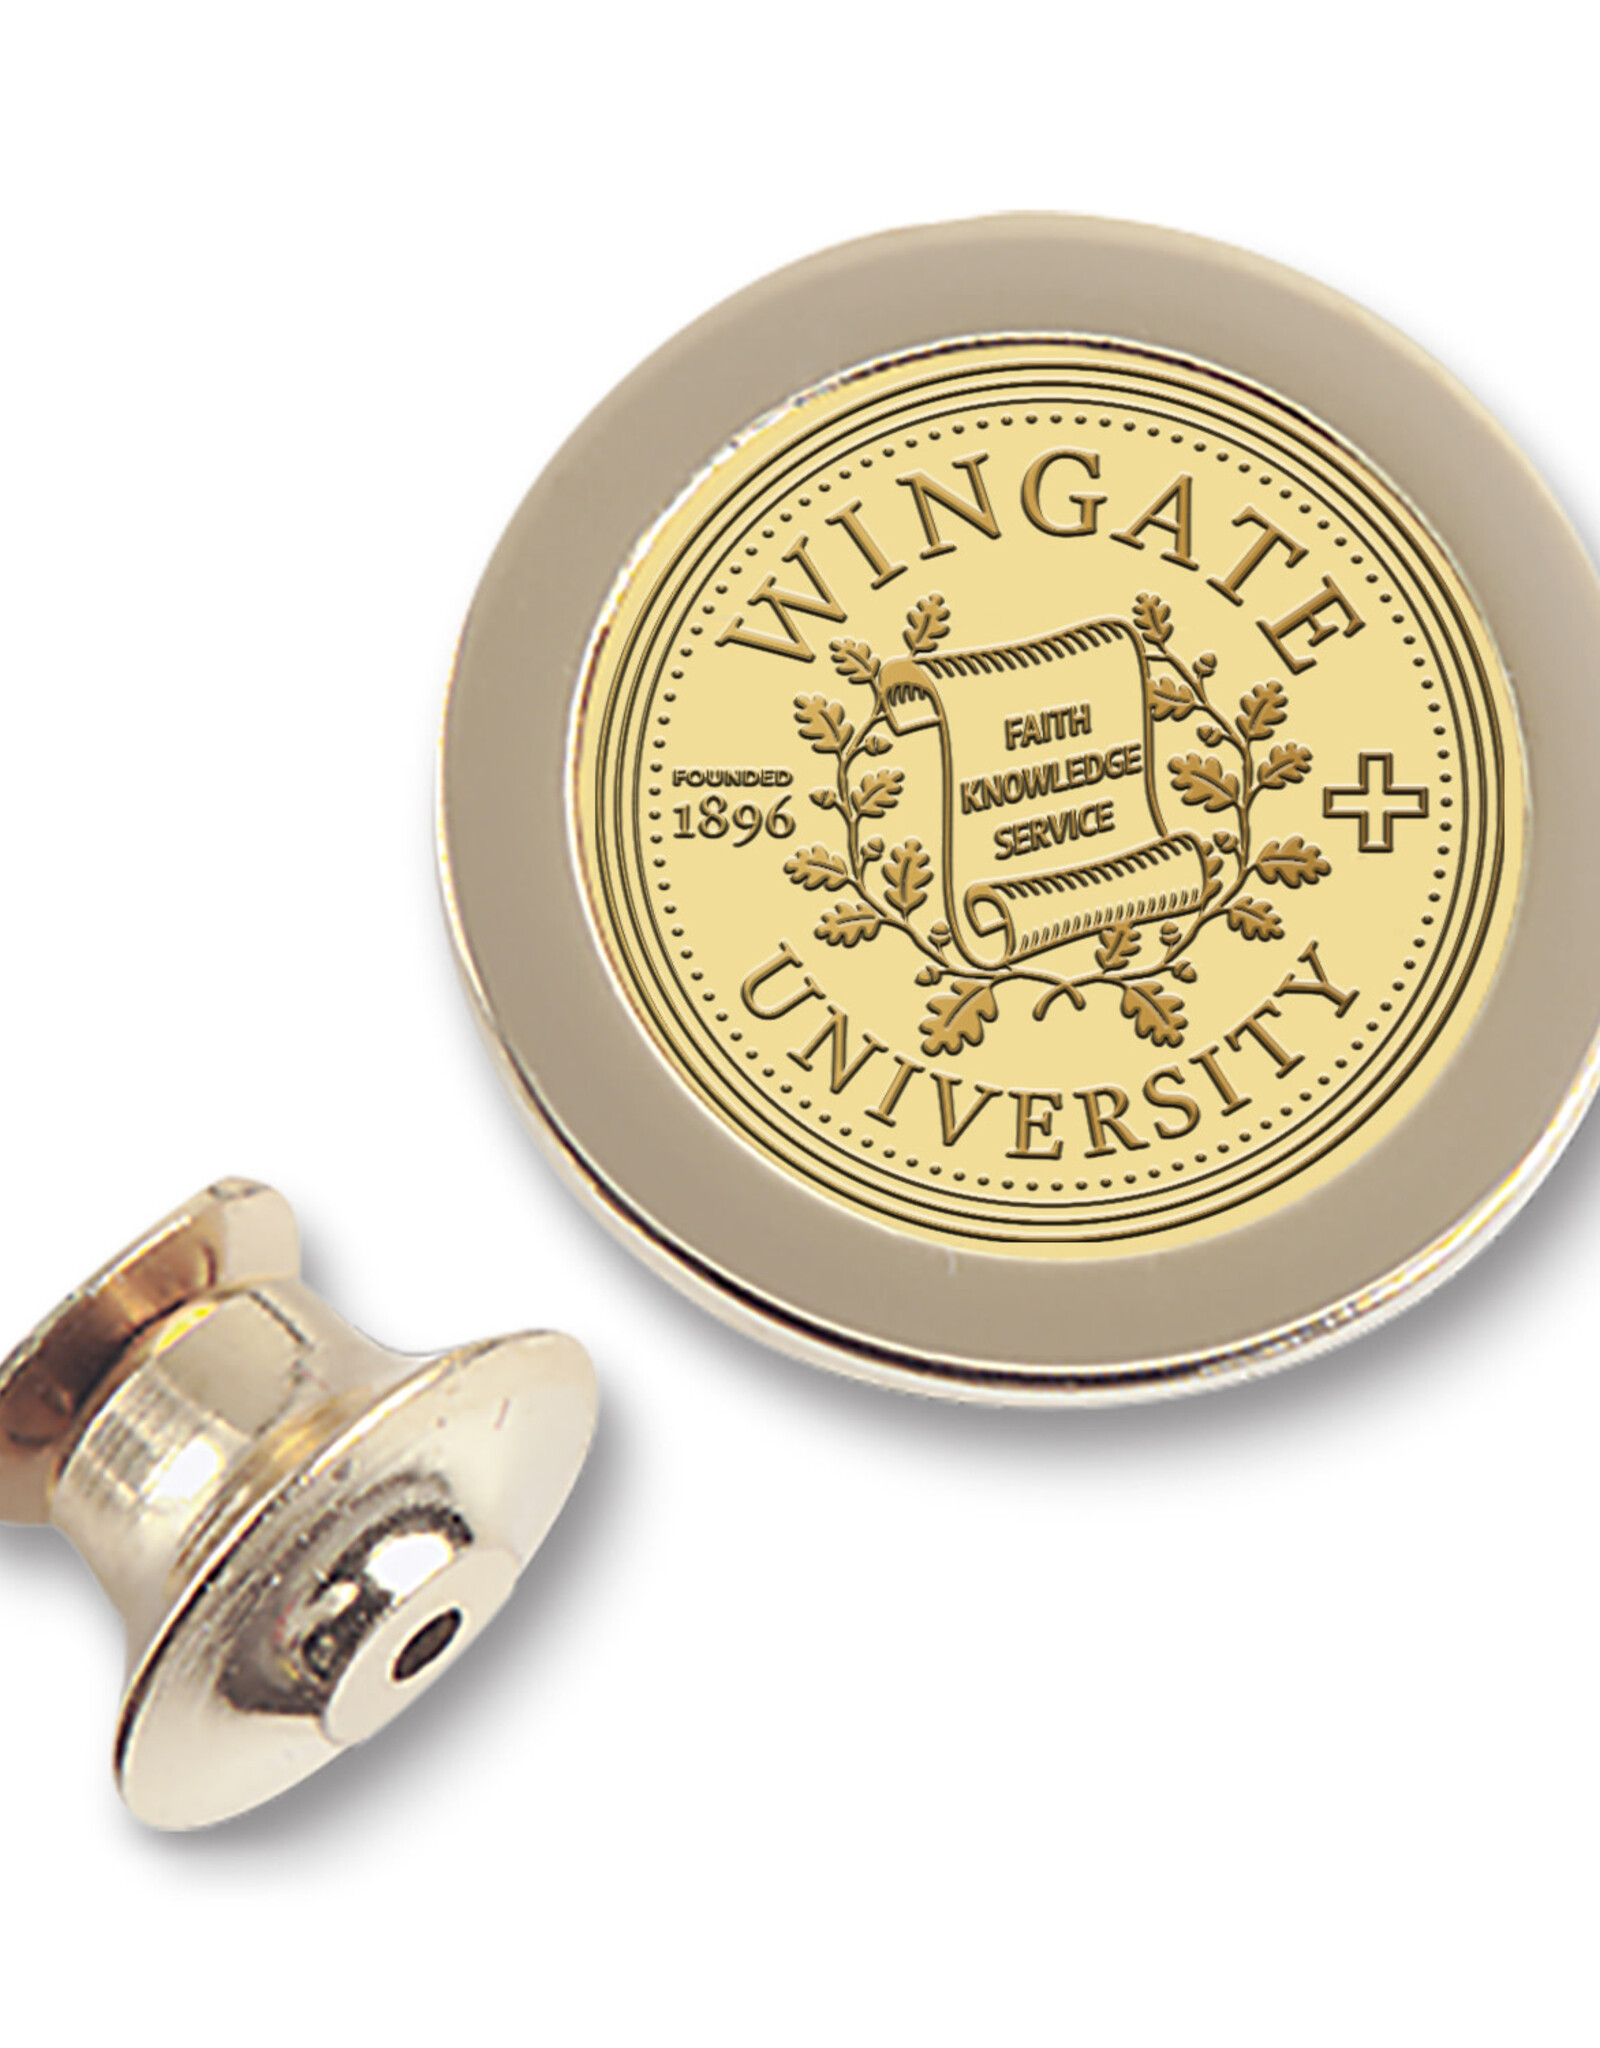 DROP SHIP ONLY  Wingate University Seal Lapel Pin (ONLINE ONLY)